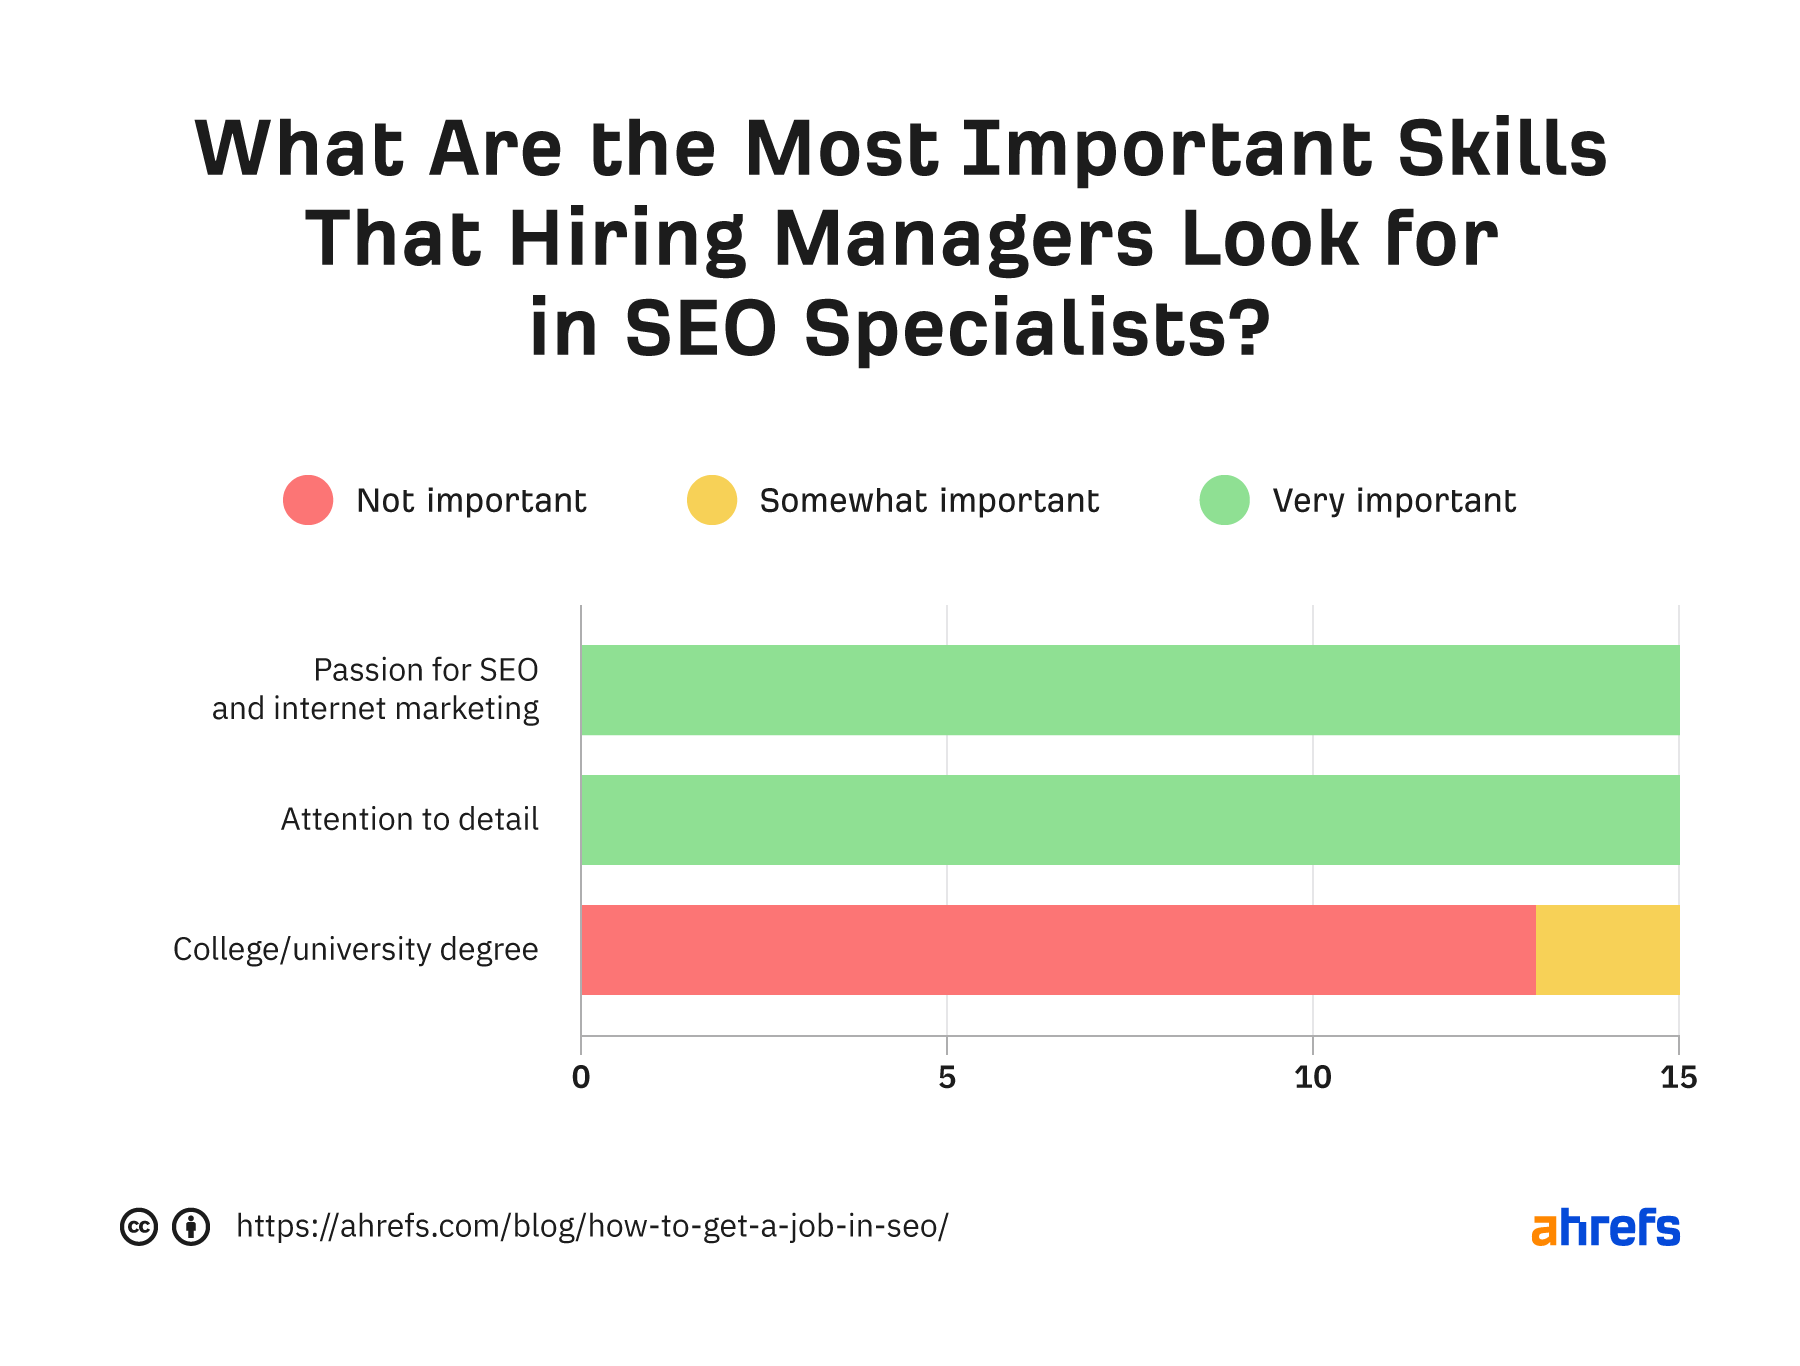 Most important skills hiring managers look for in SEO specialists